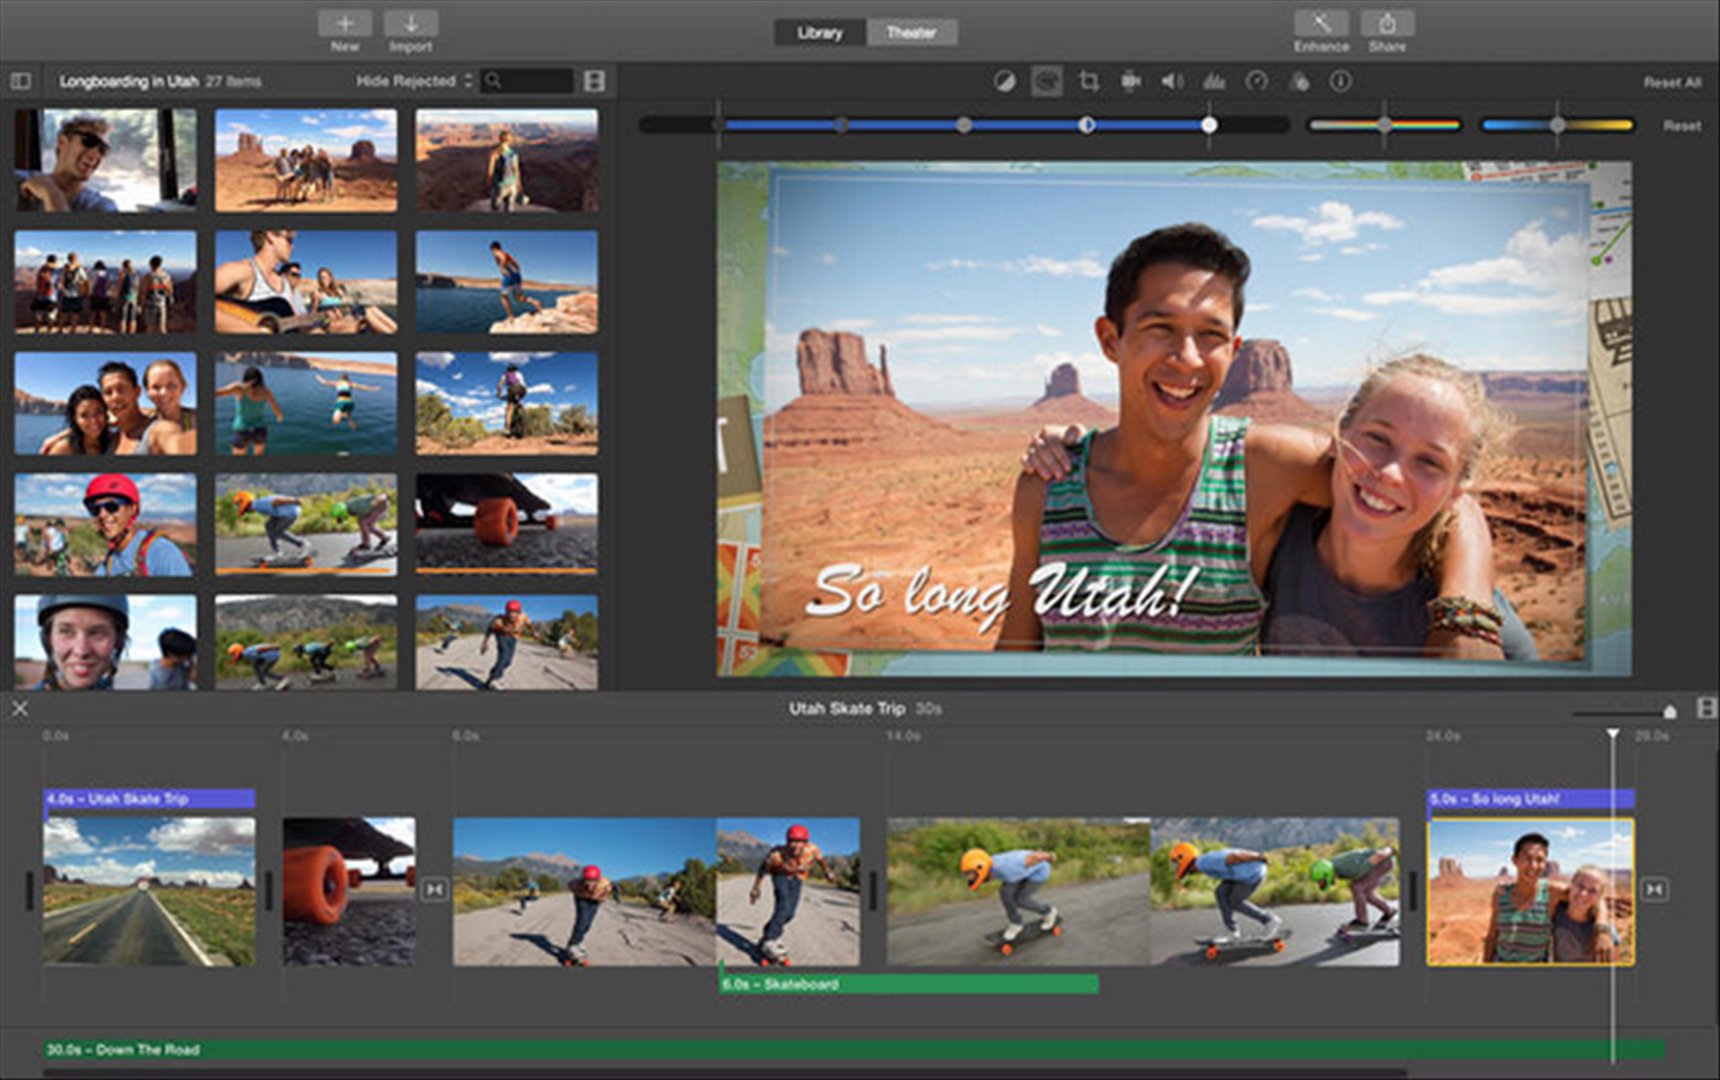 imovie for windows torrent download